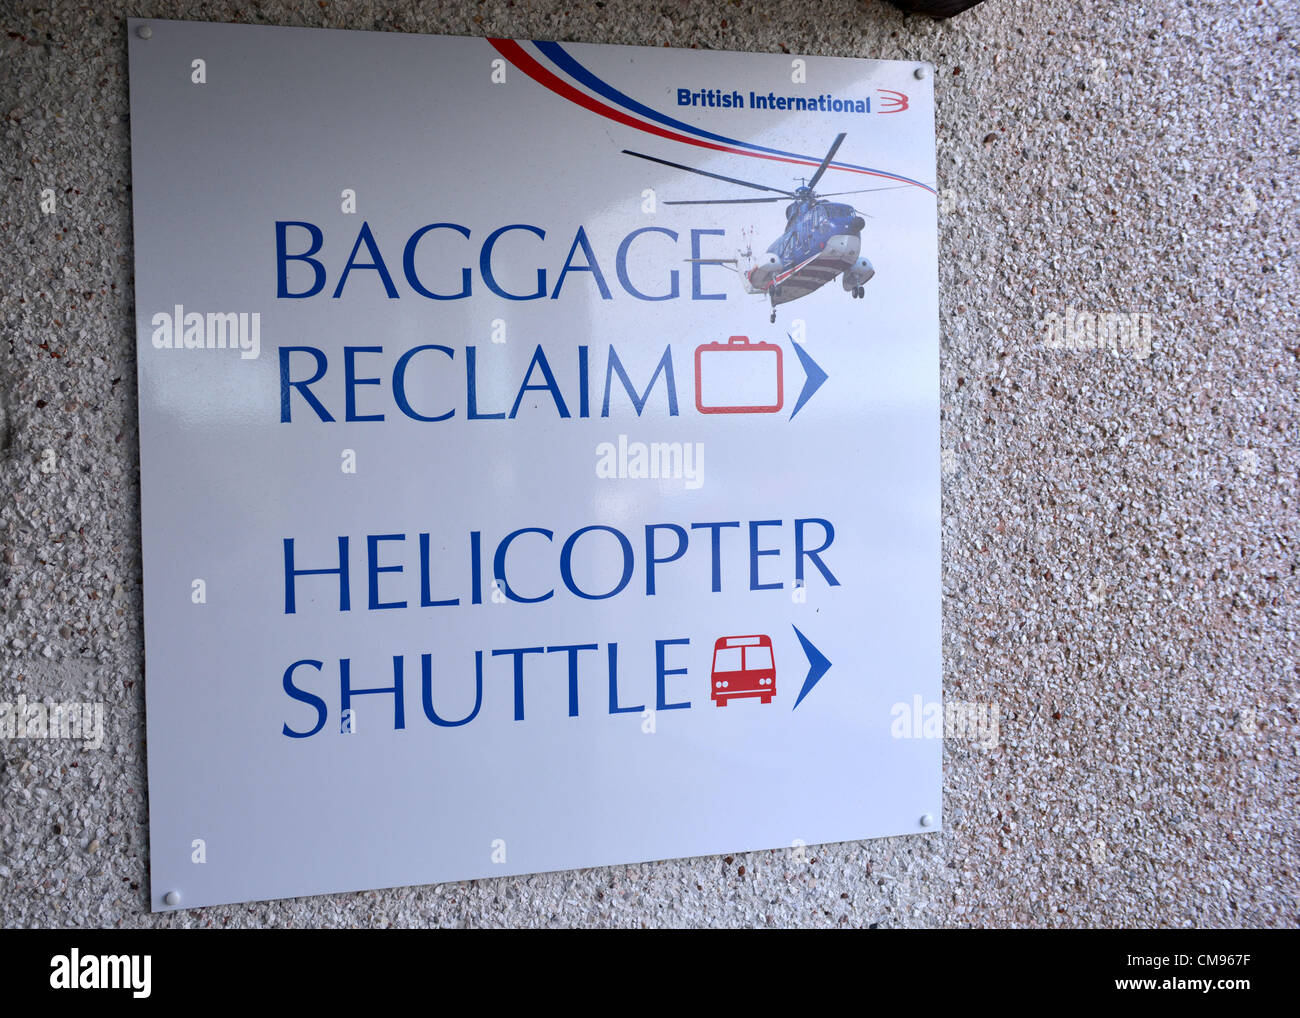 Baggage reclaim sign and helicopter shuttle sign, Isles of Scilly Stock Photo